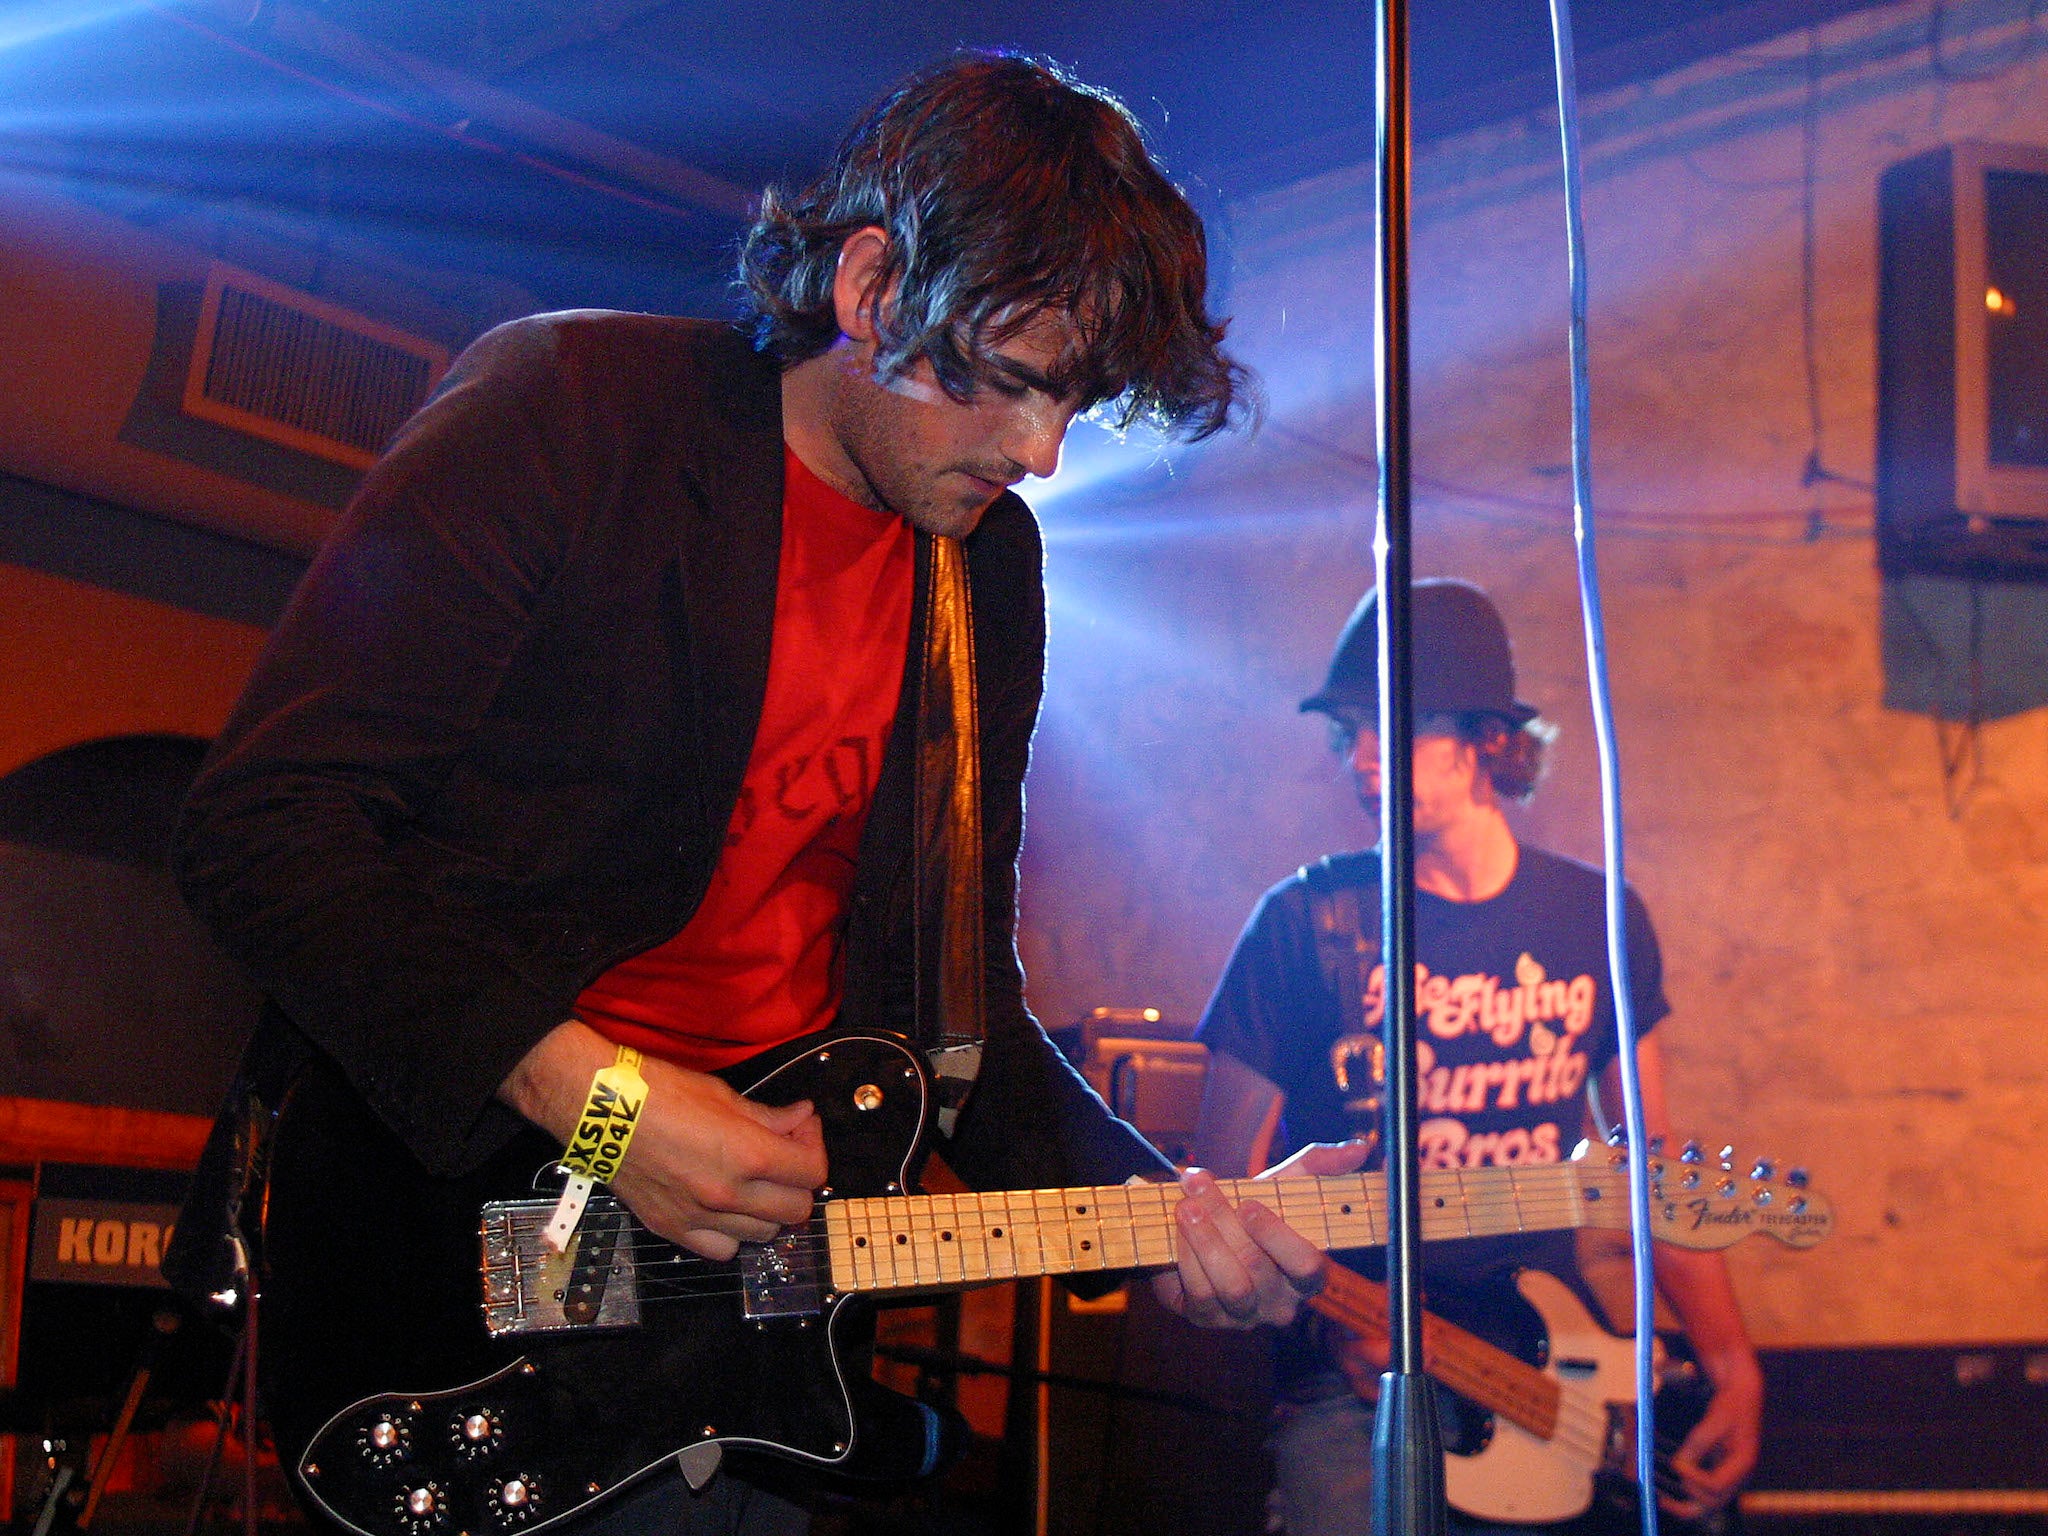 The Thrills play South by Southwest at the Exodus in 2004 in Austin, Texas